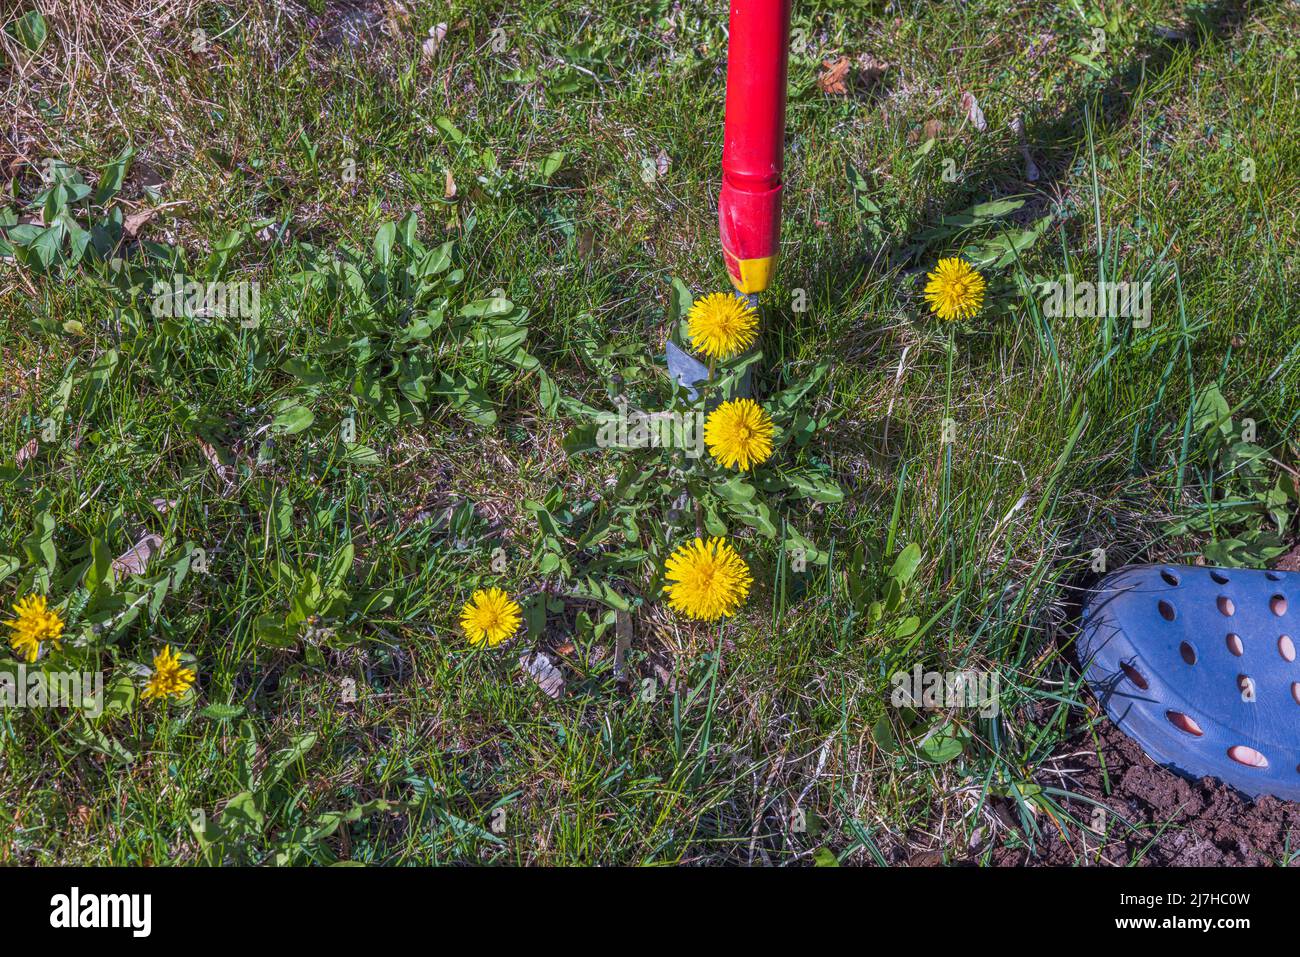 Close up view of man uprooting dandelion weeds from lawn. Sweden. Stock Photo